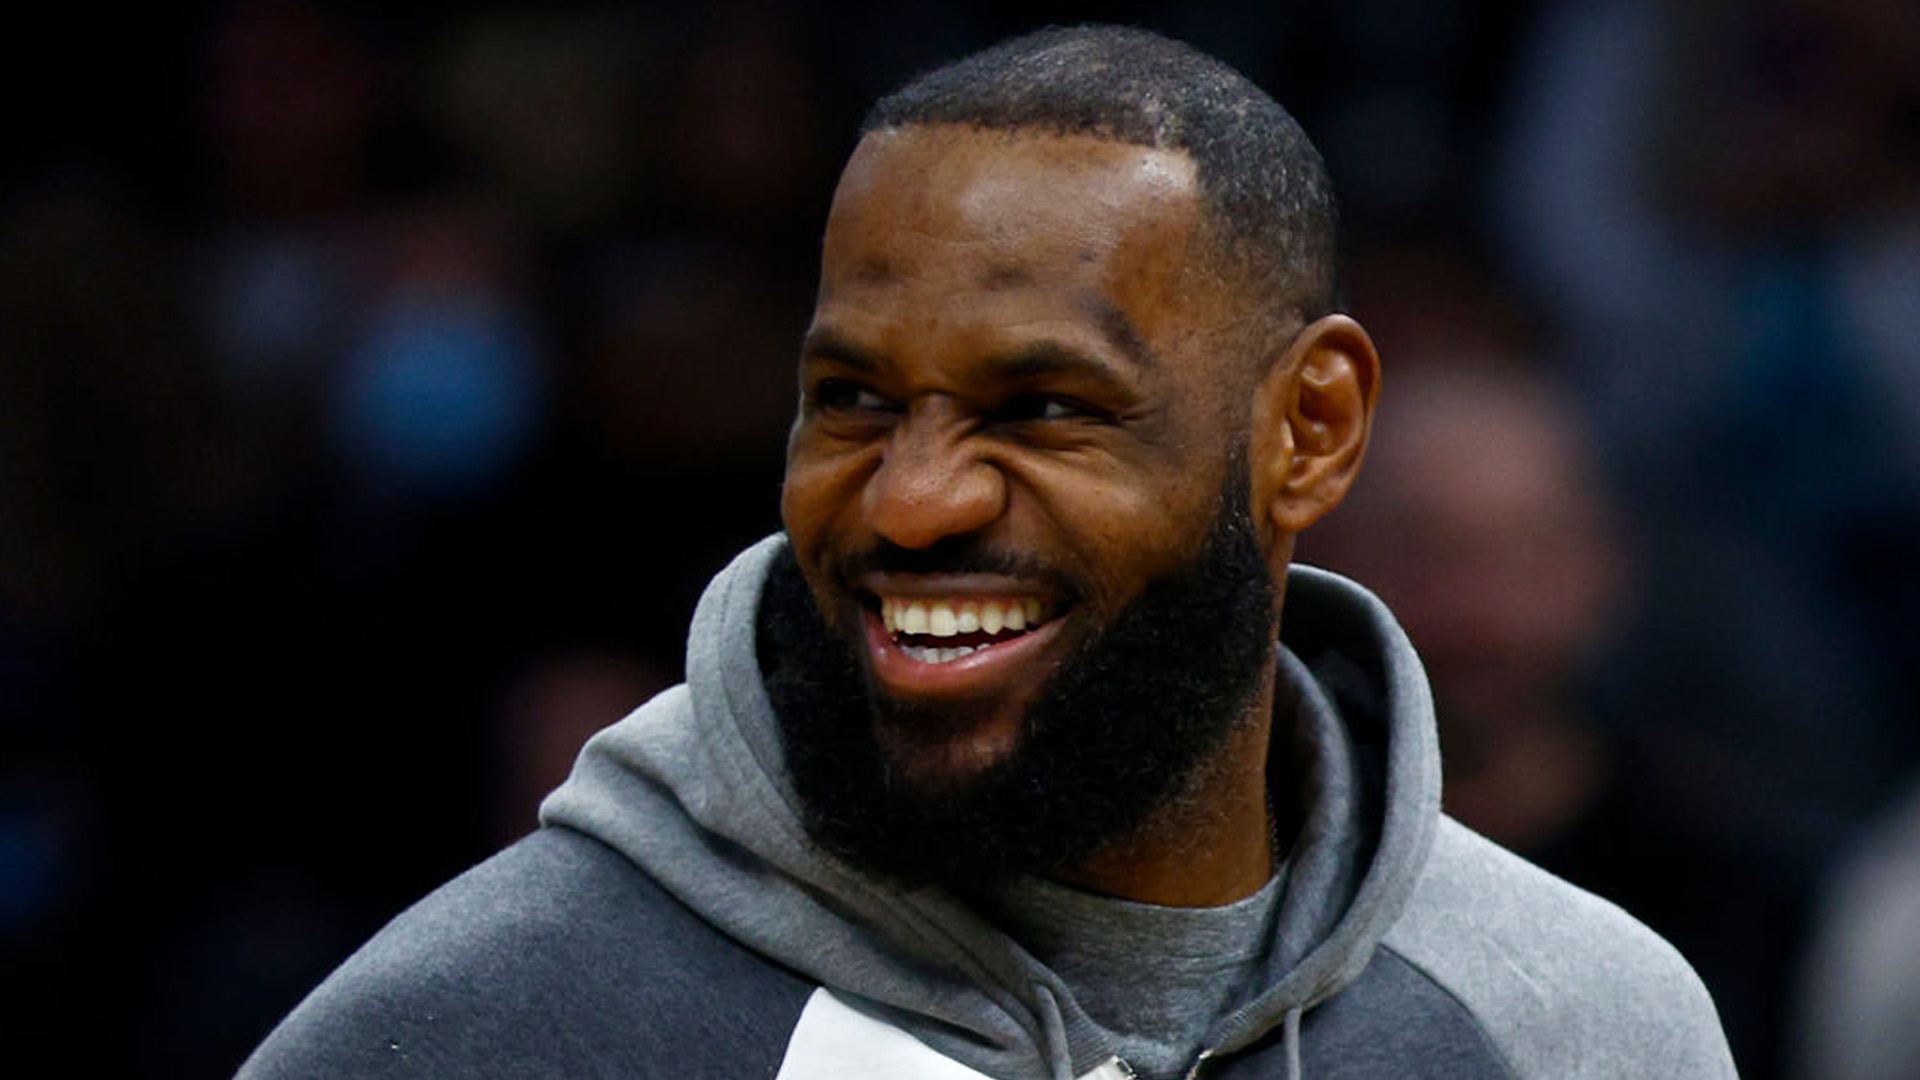 LeBron James Forms Partnership To Allow His I Promise School Students To Attend College For Free